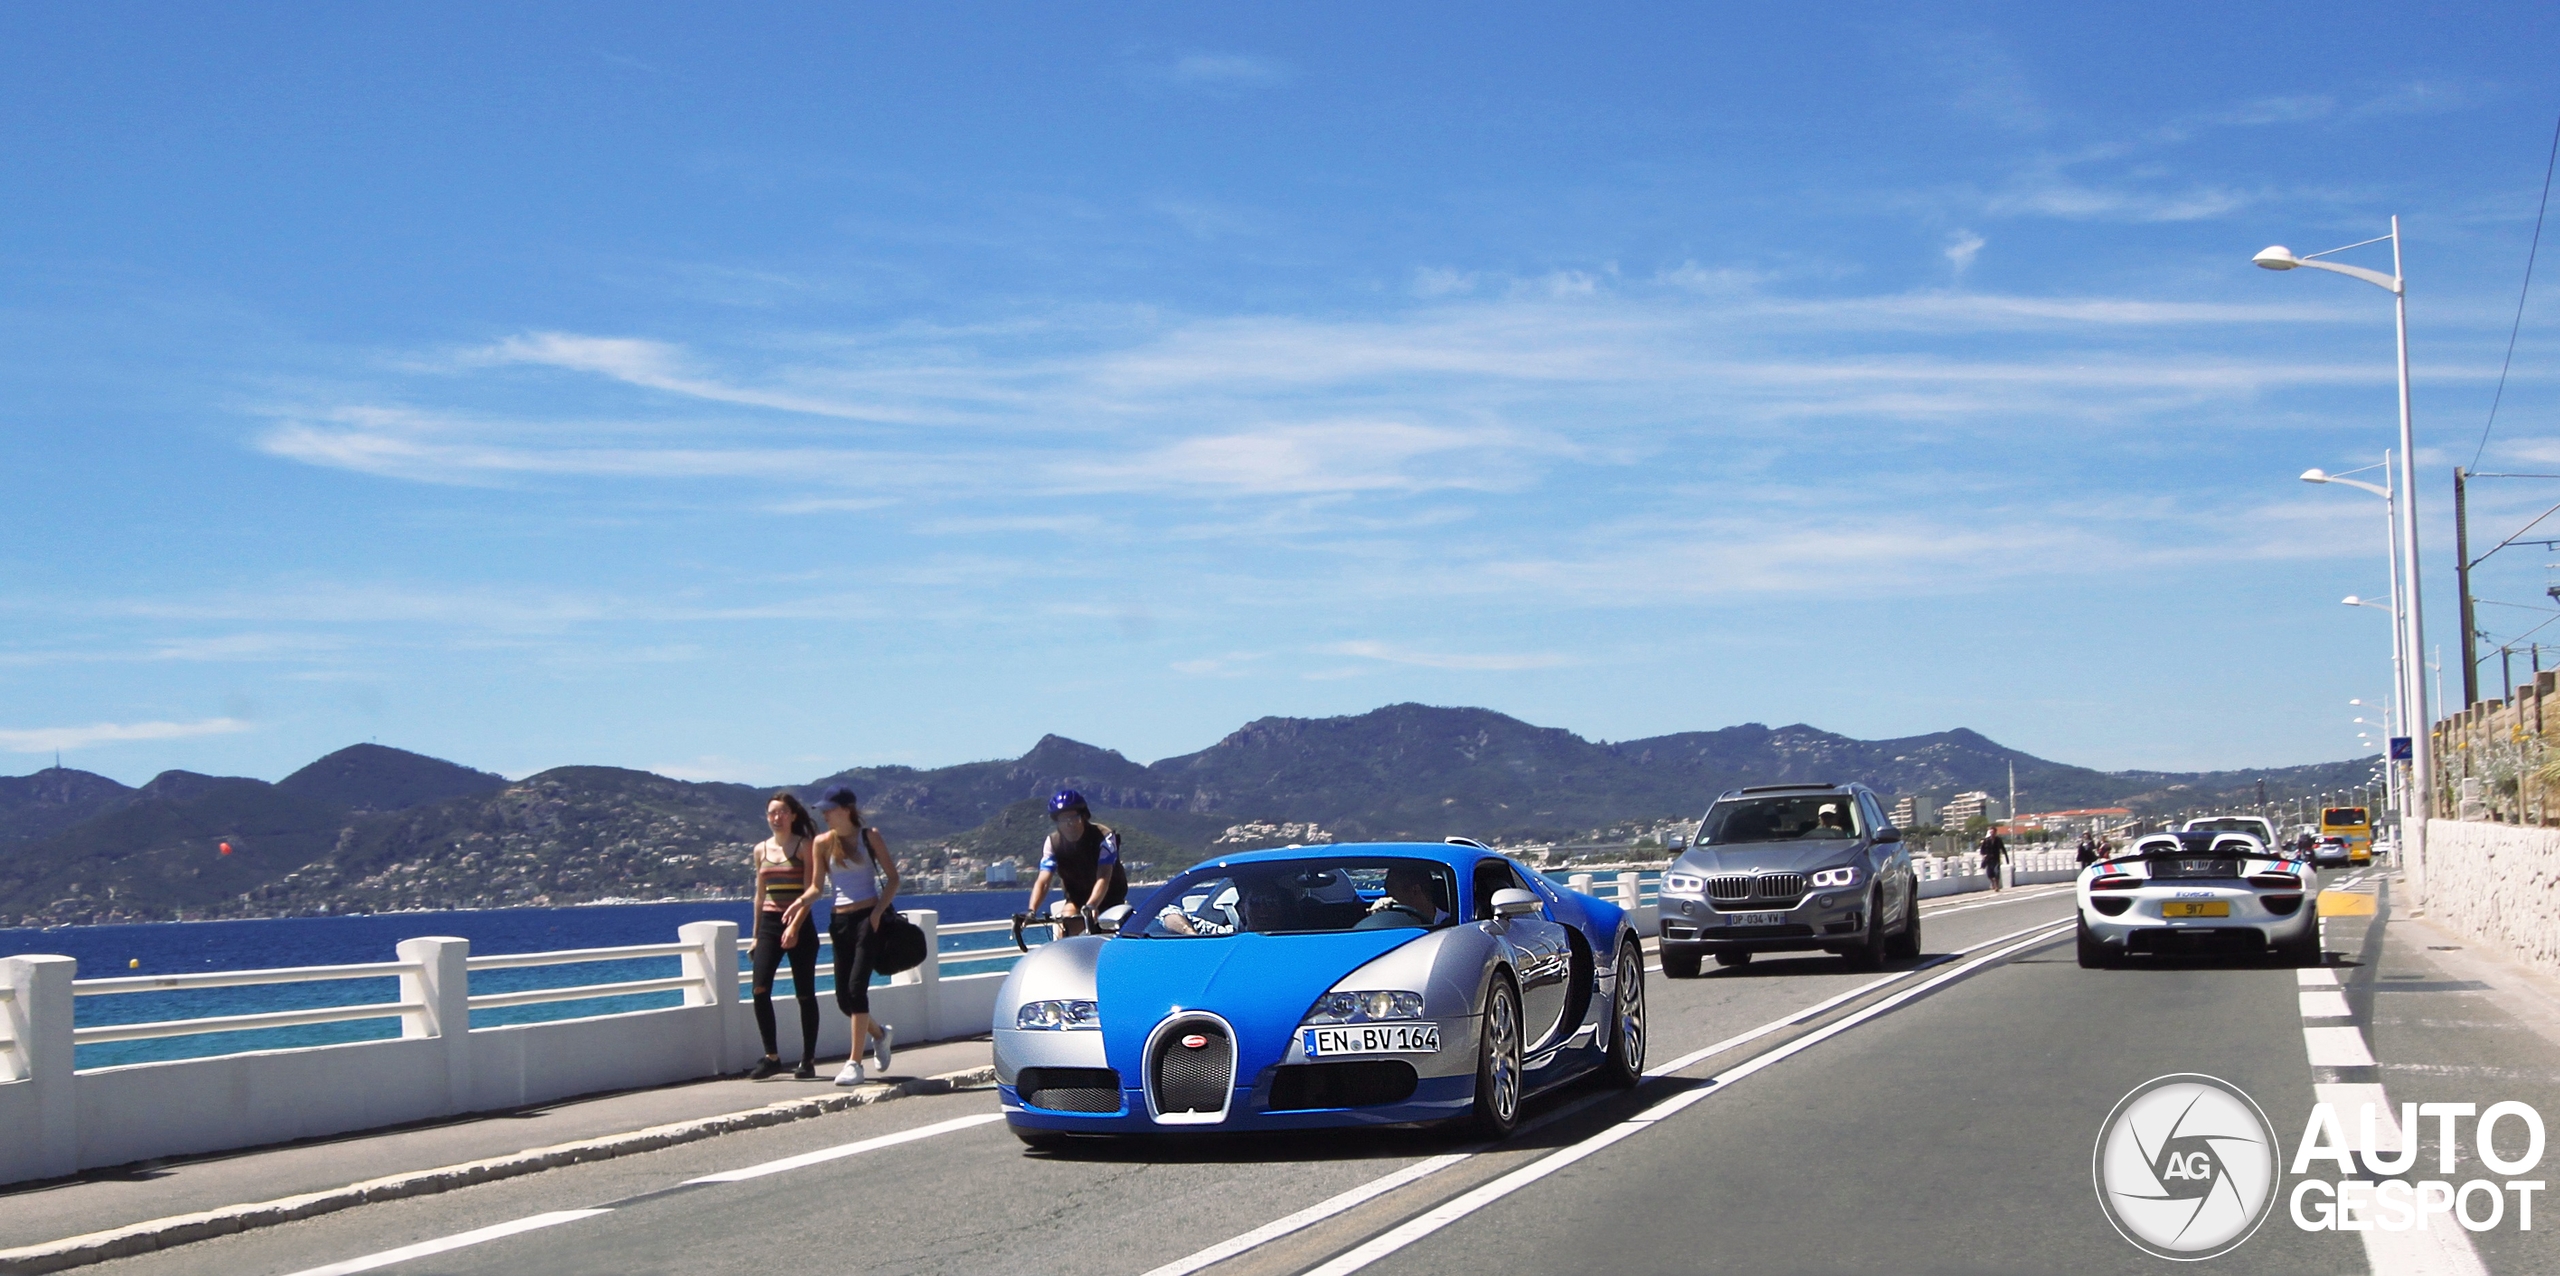 The casual traffic in Cannes